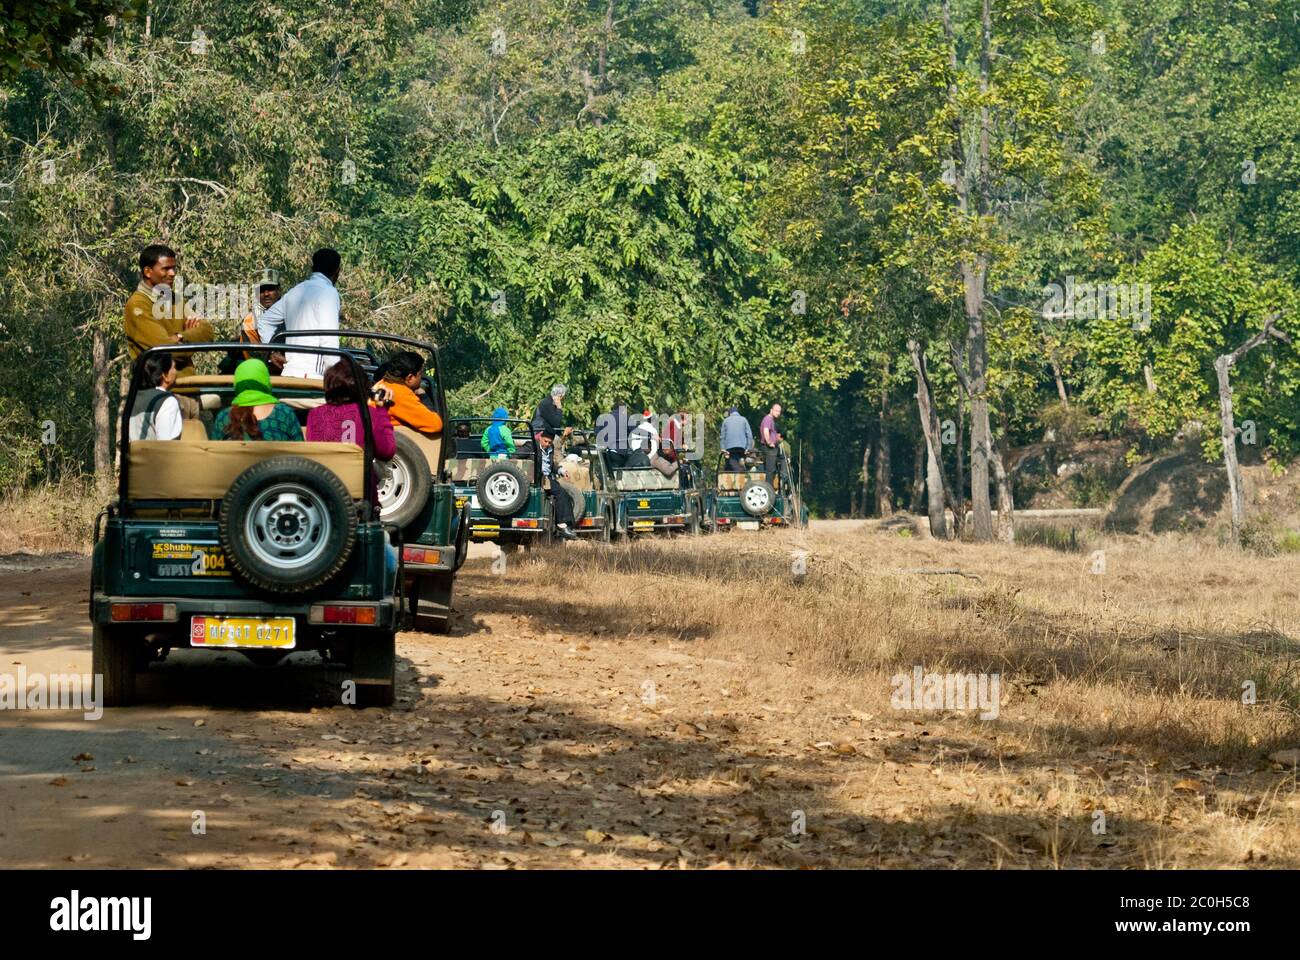 Ecotourism in India at Kanha Tiger Reserve Stock Photo